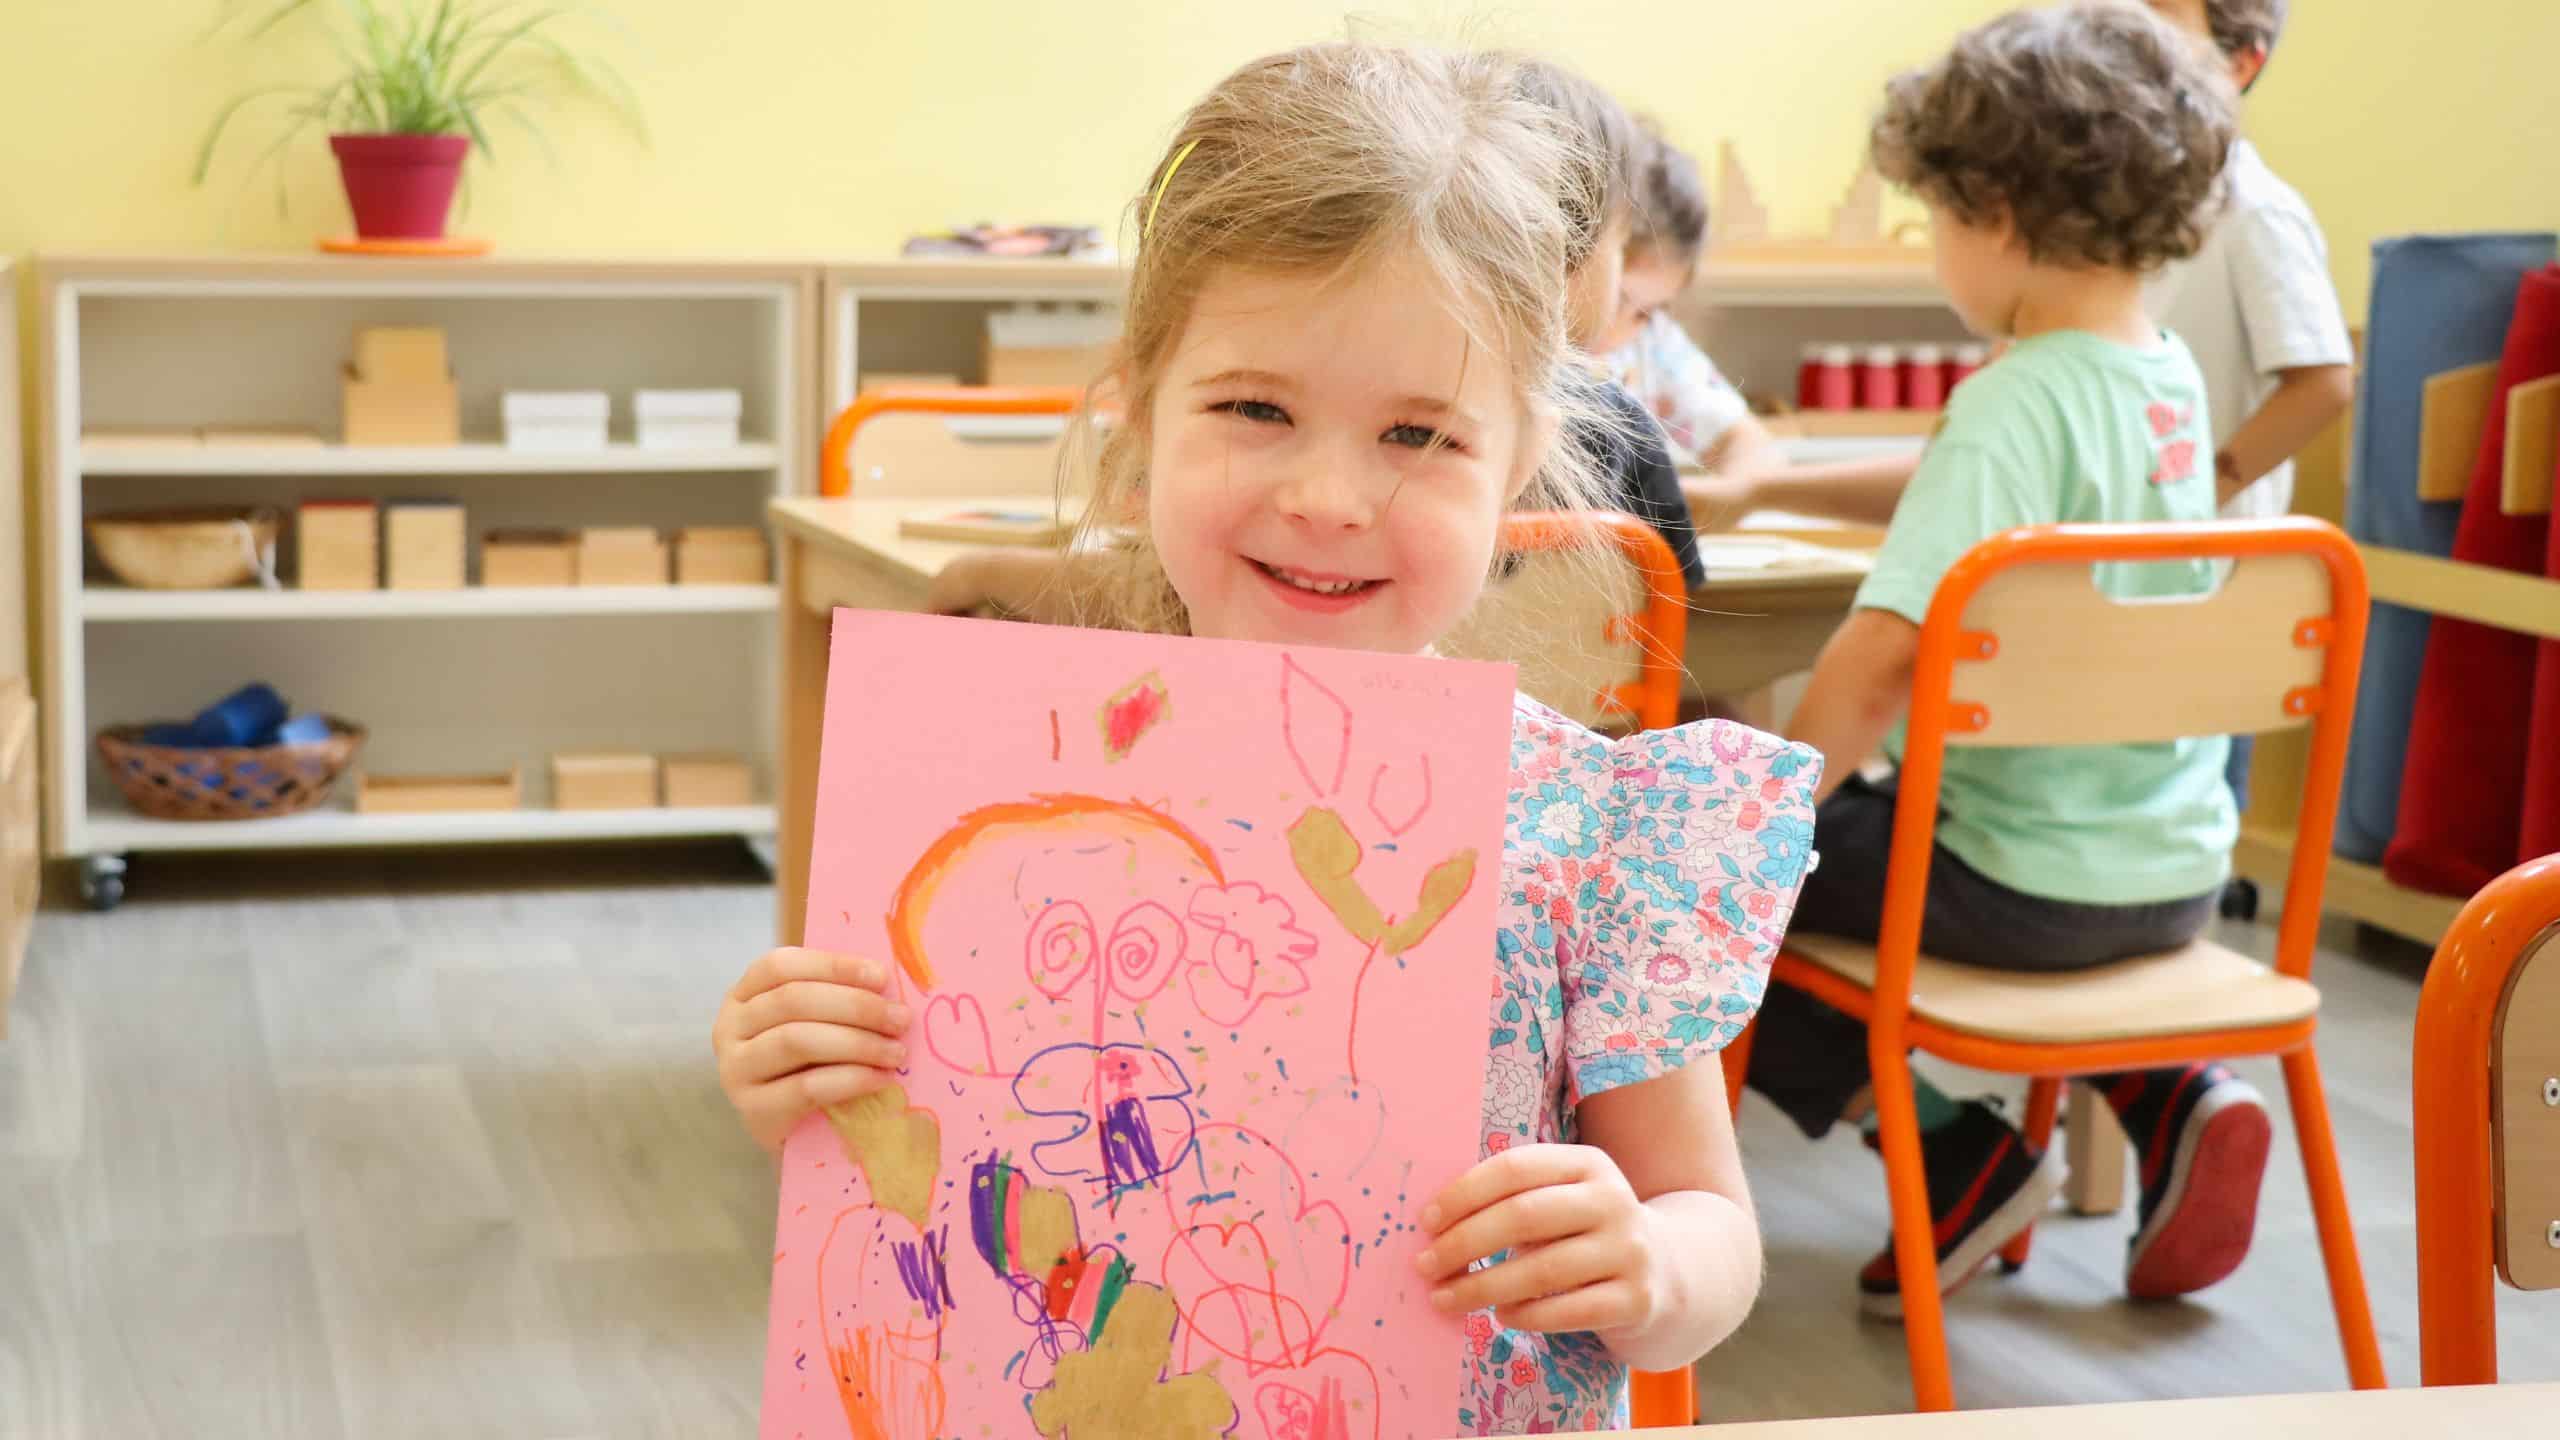 Do you have preschooler or Kindergartners at home? If so, check out ou